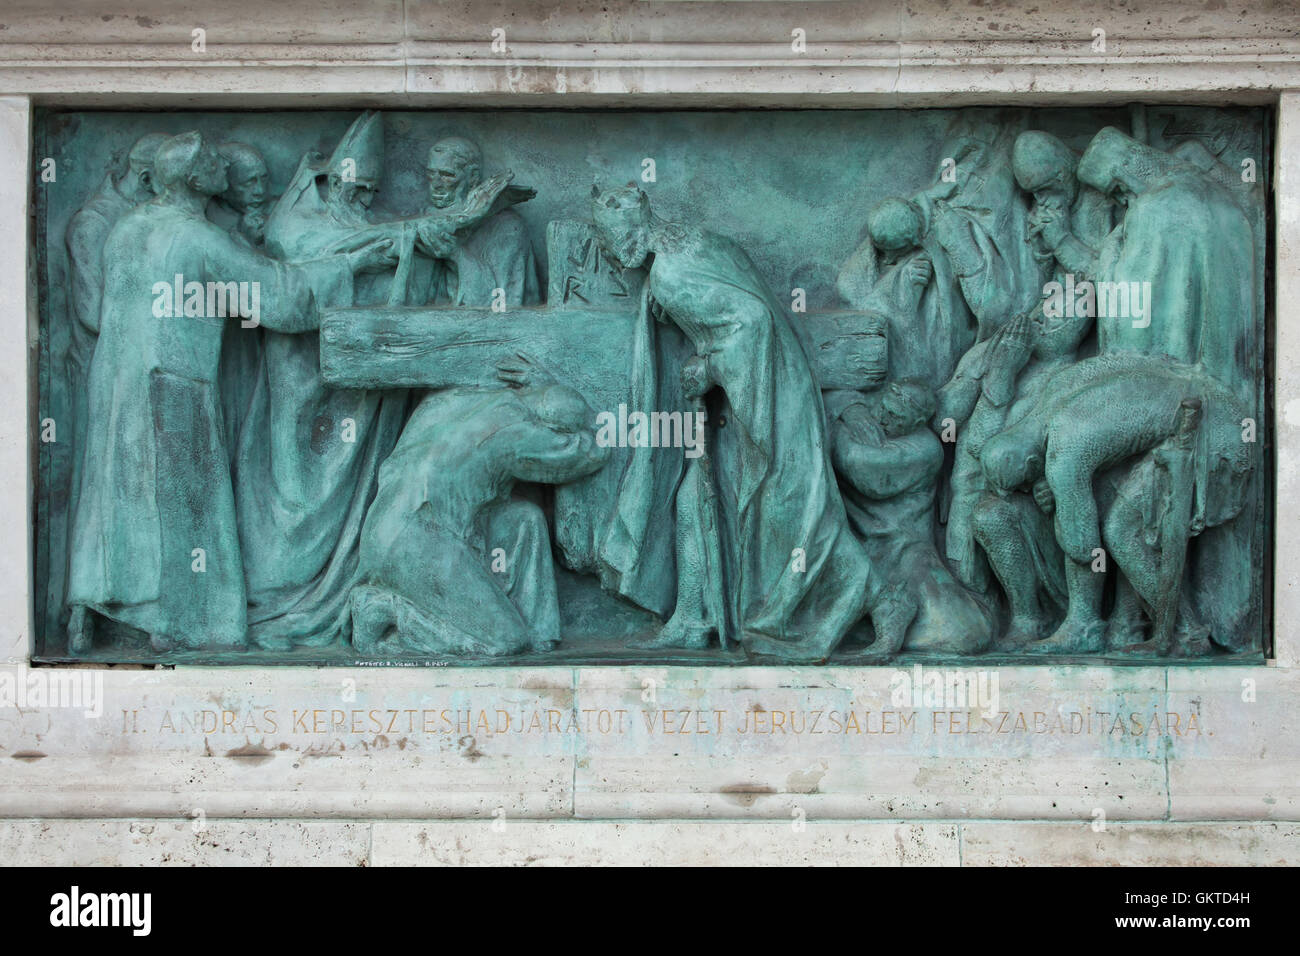 King Andrew II of Hungary leads the Fifth Crusade to the Holy Land in 1217-1218. Bronze relief by Hungarian sculptor Gyorgy Zala on the Millennium Monument in the Heroes Square in Budapest, Hungary. Stock Photo